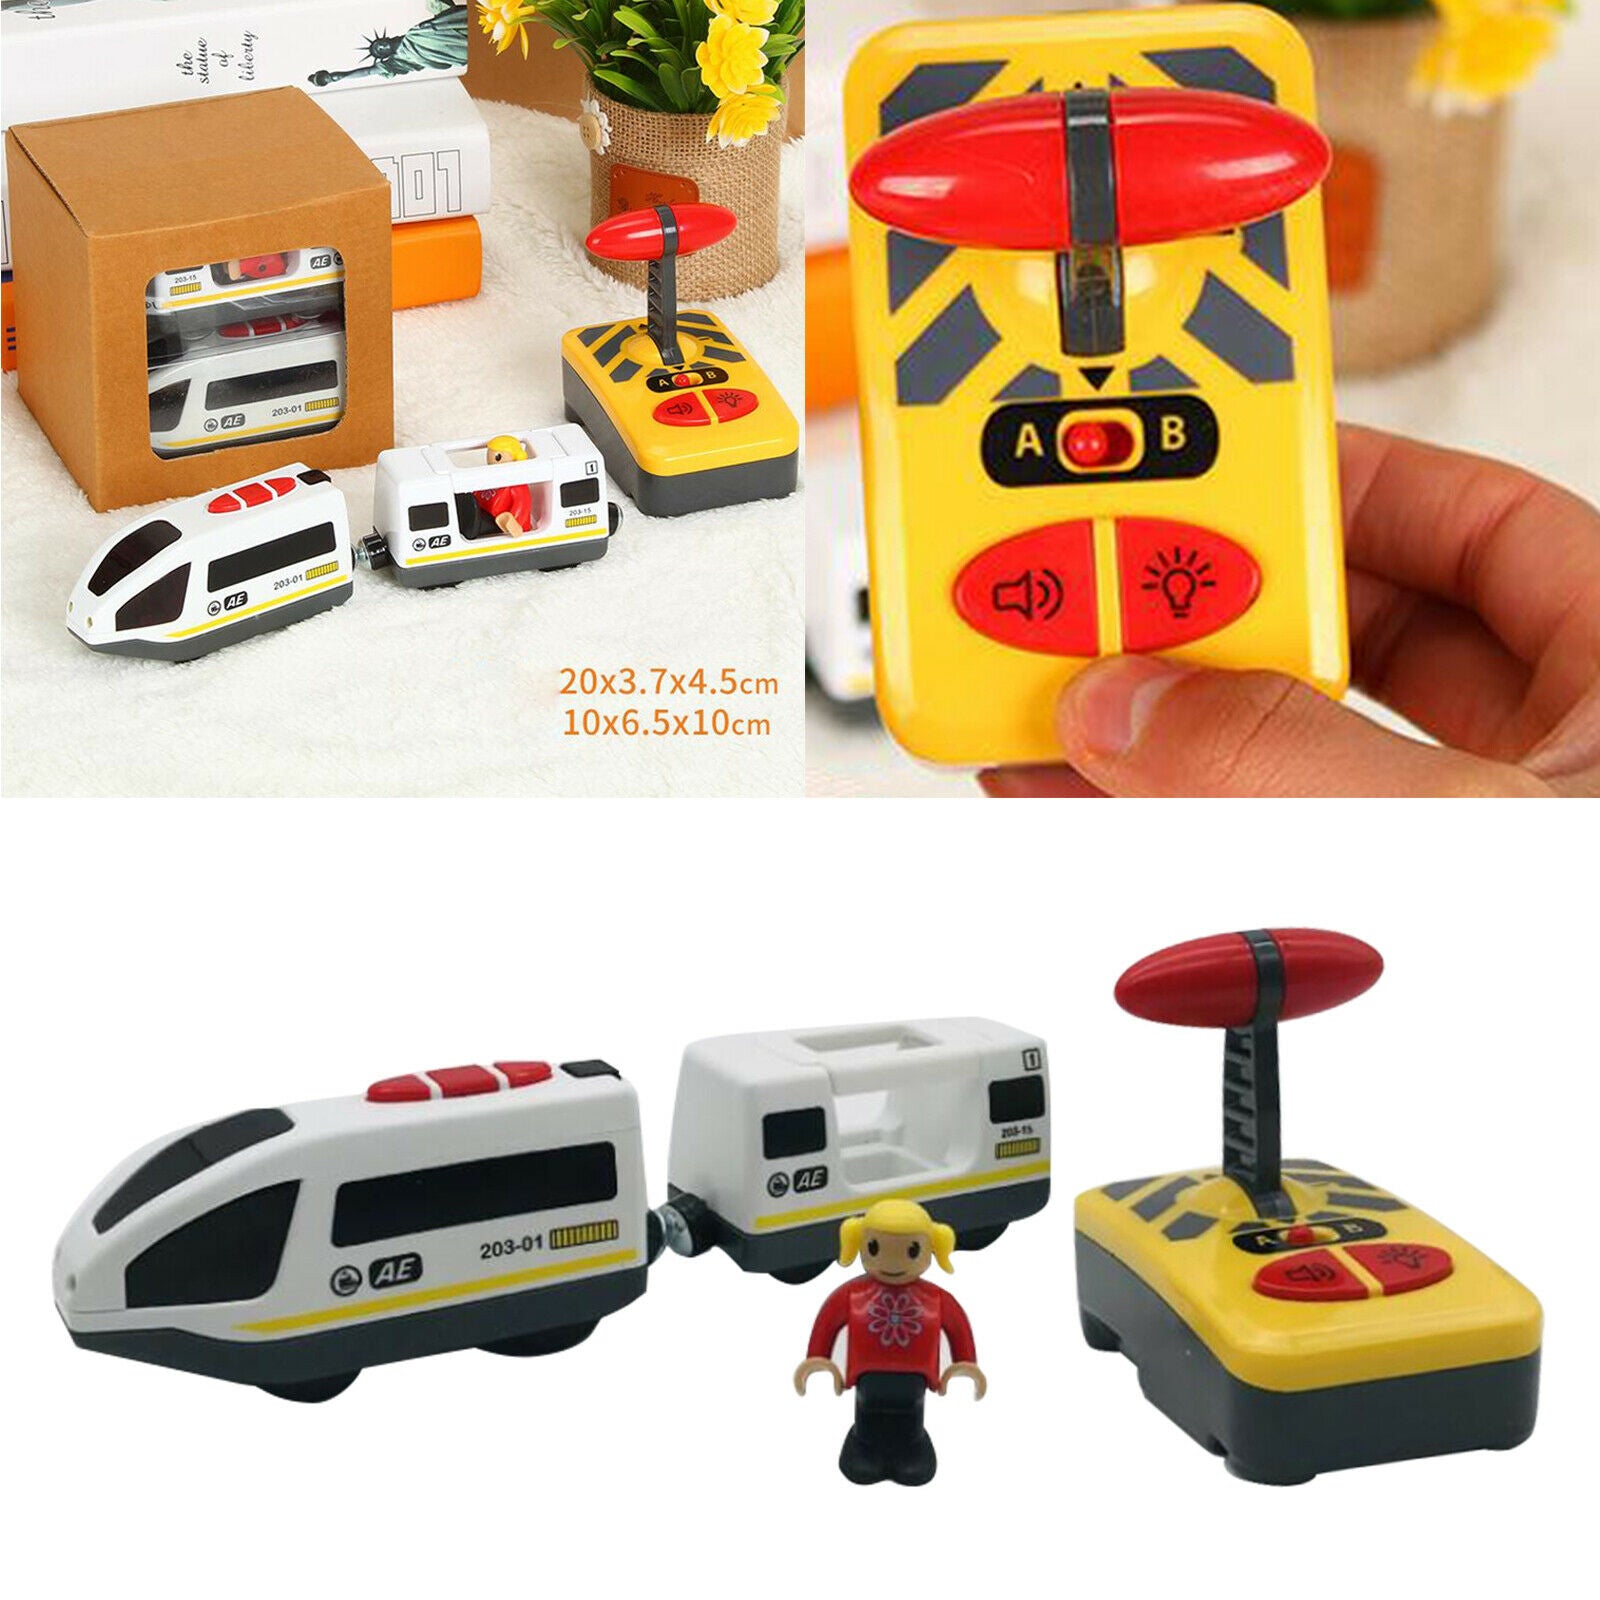 Remote Control Magnetic Train Toys Set Hobby Train Fits Most Wooden Tracks